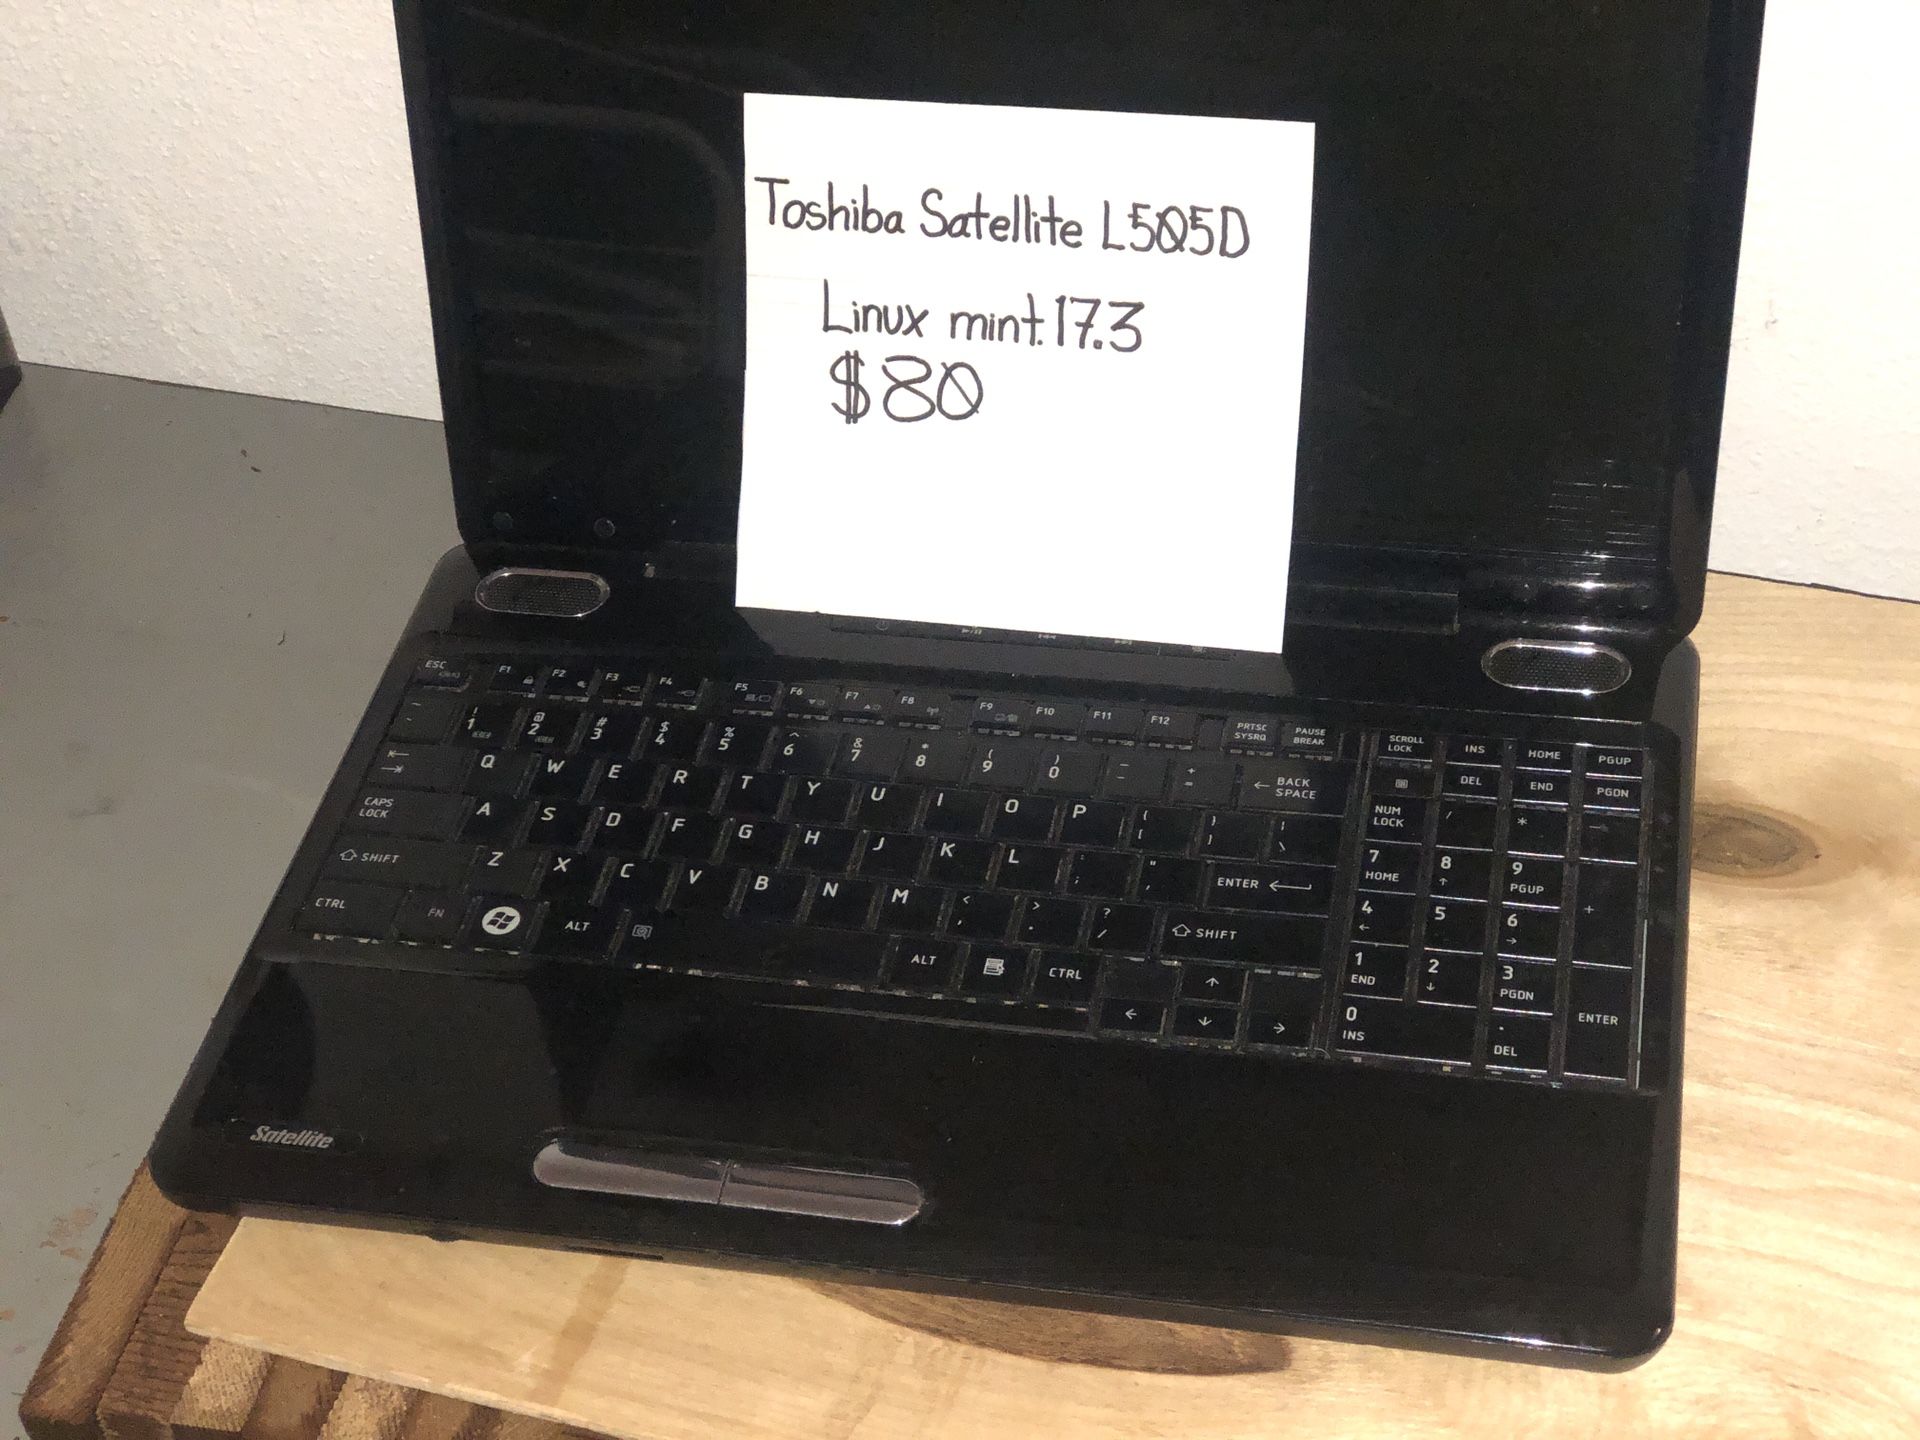 Toshiba satellite L505d laptop computer with Linux mint universal charger